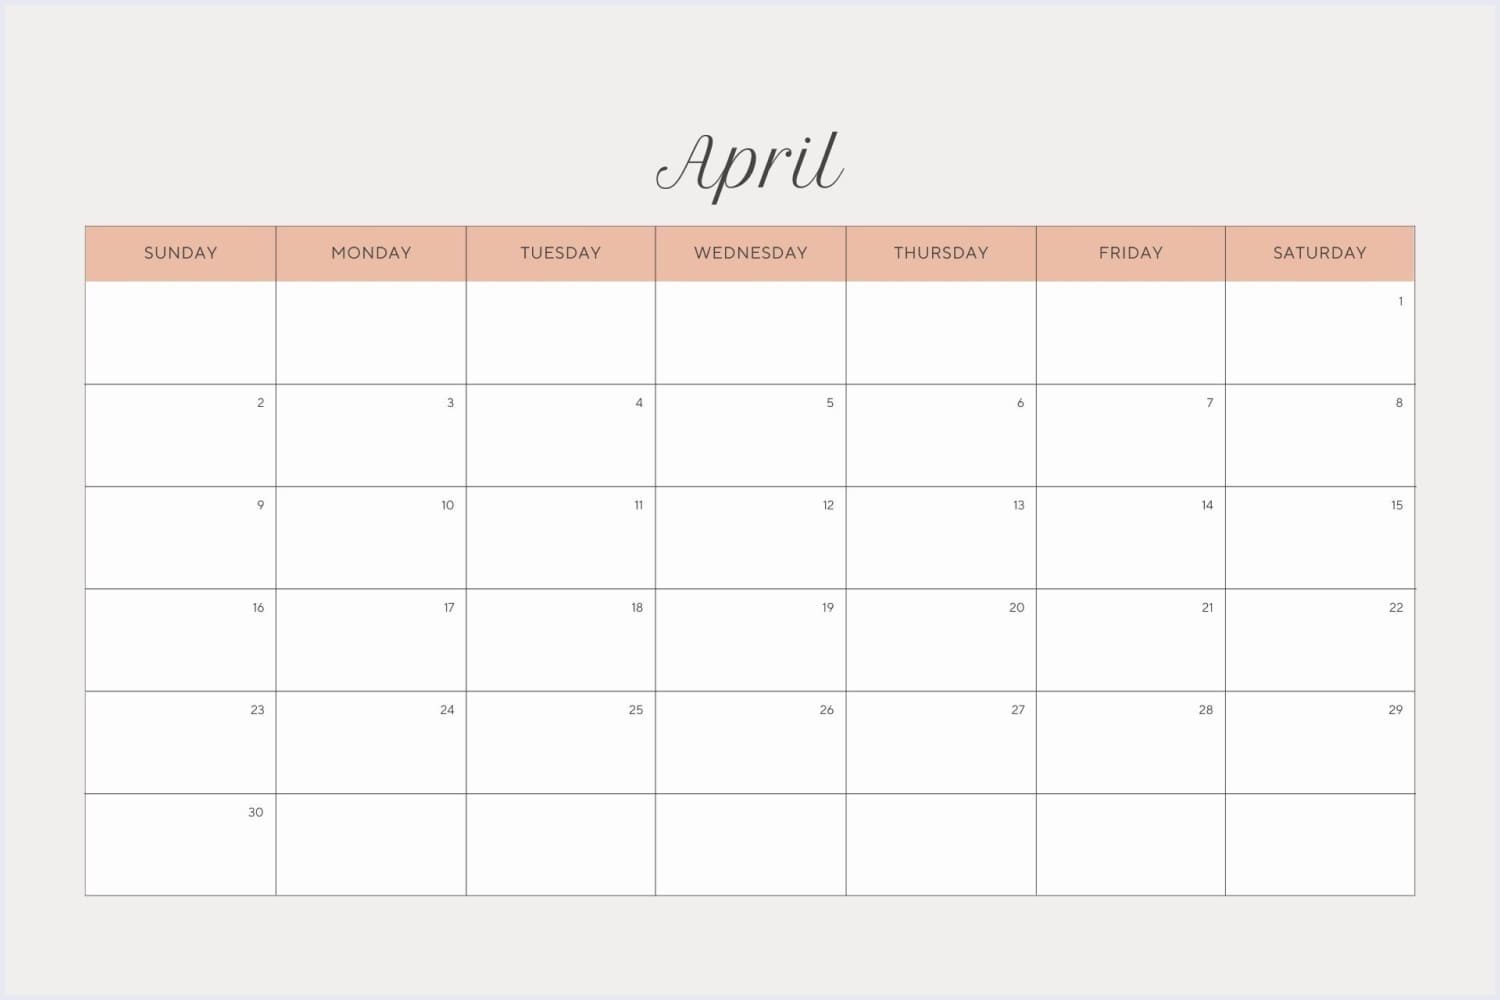 April calendar with orange title and white background.